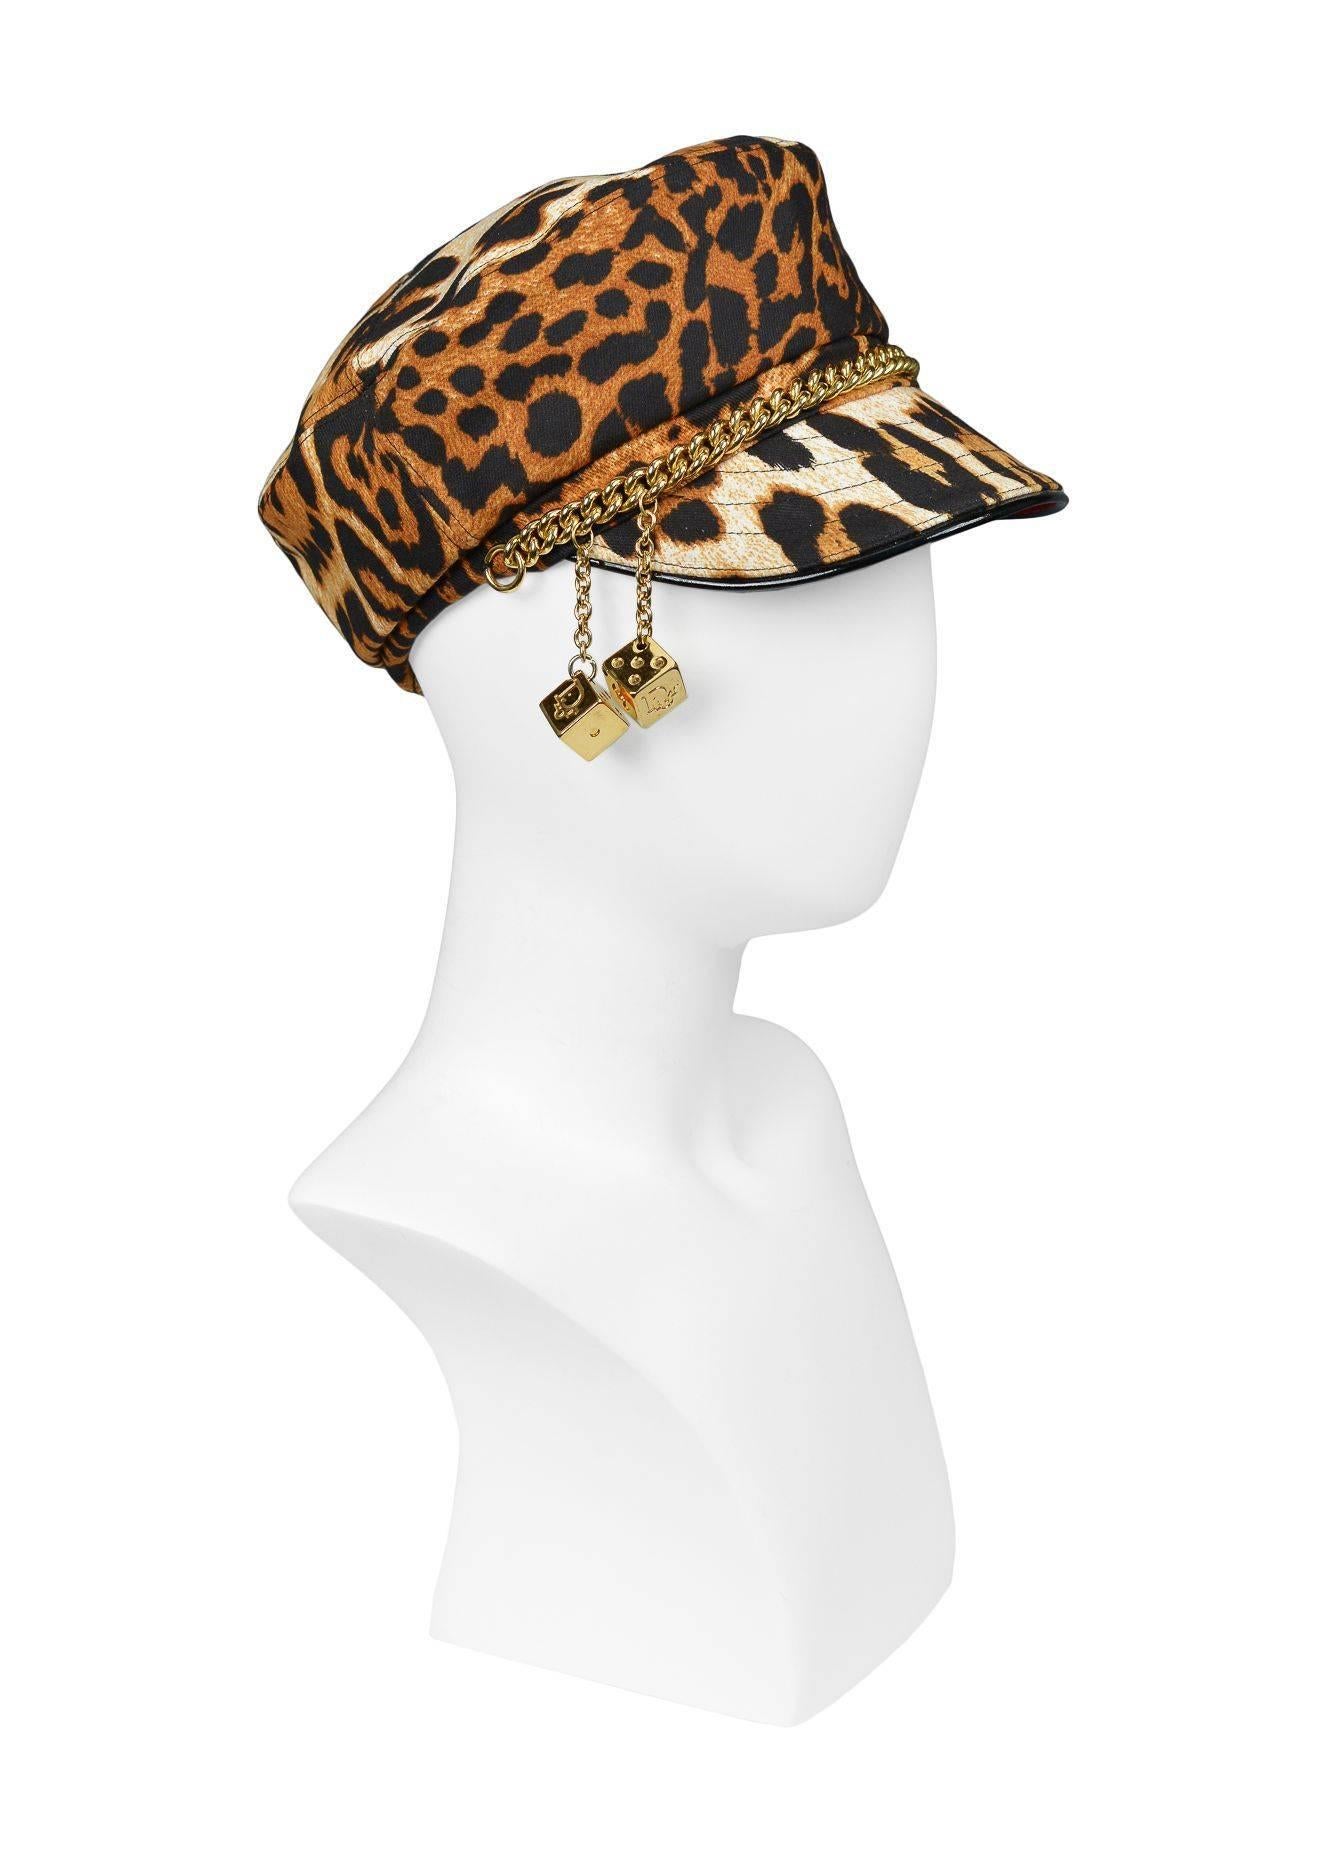 Christian Dior by John Galliano leopard print hat with attached chain and gold 